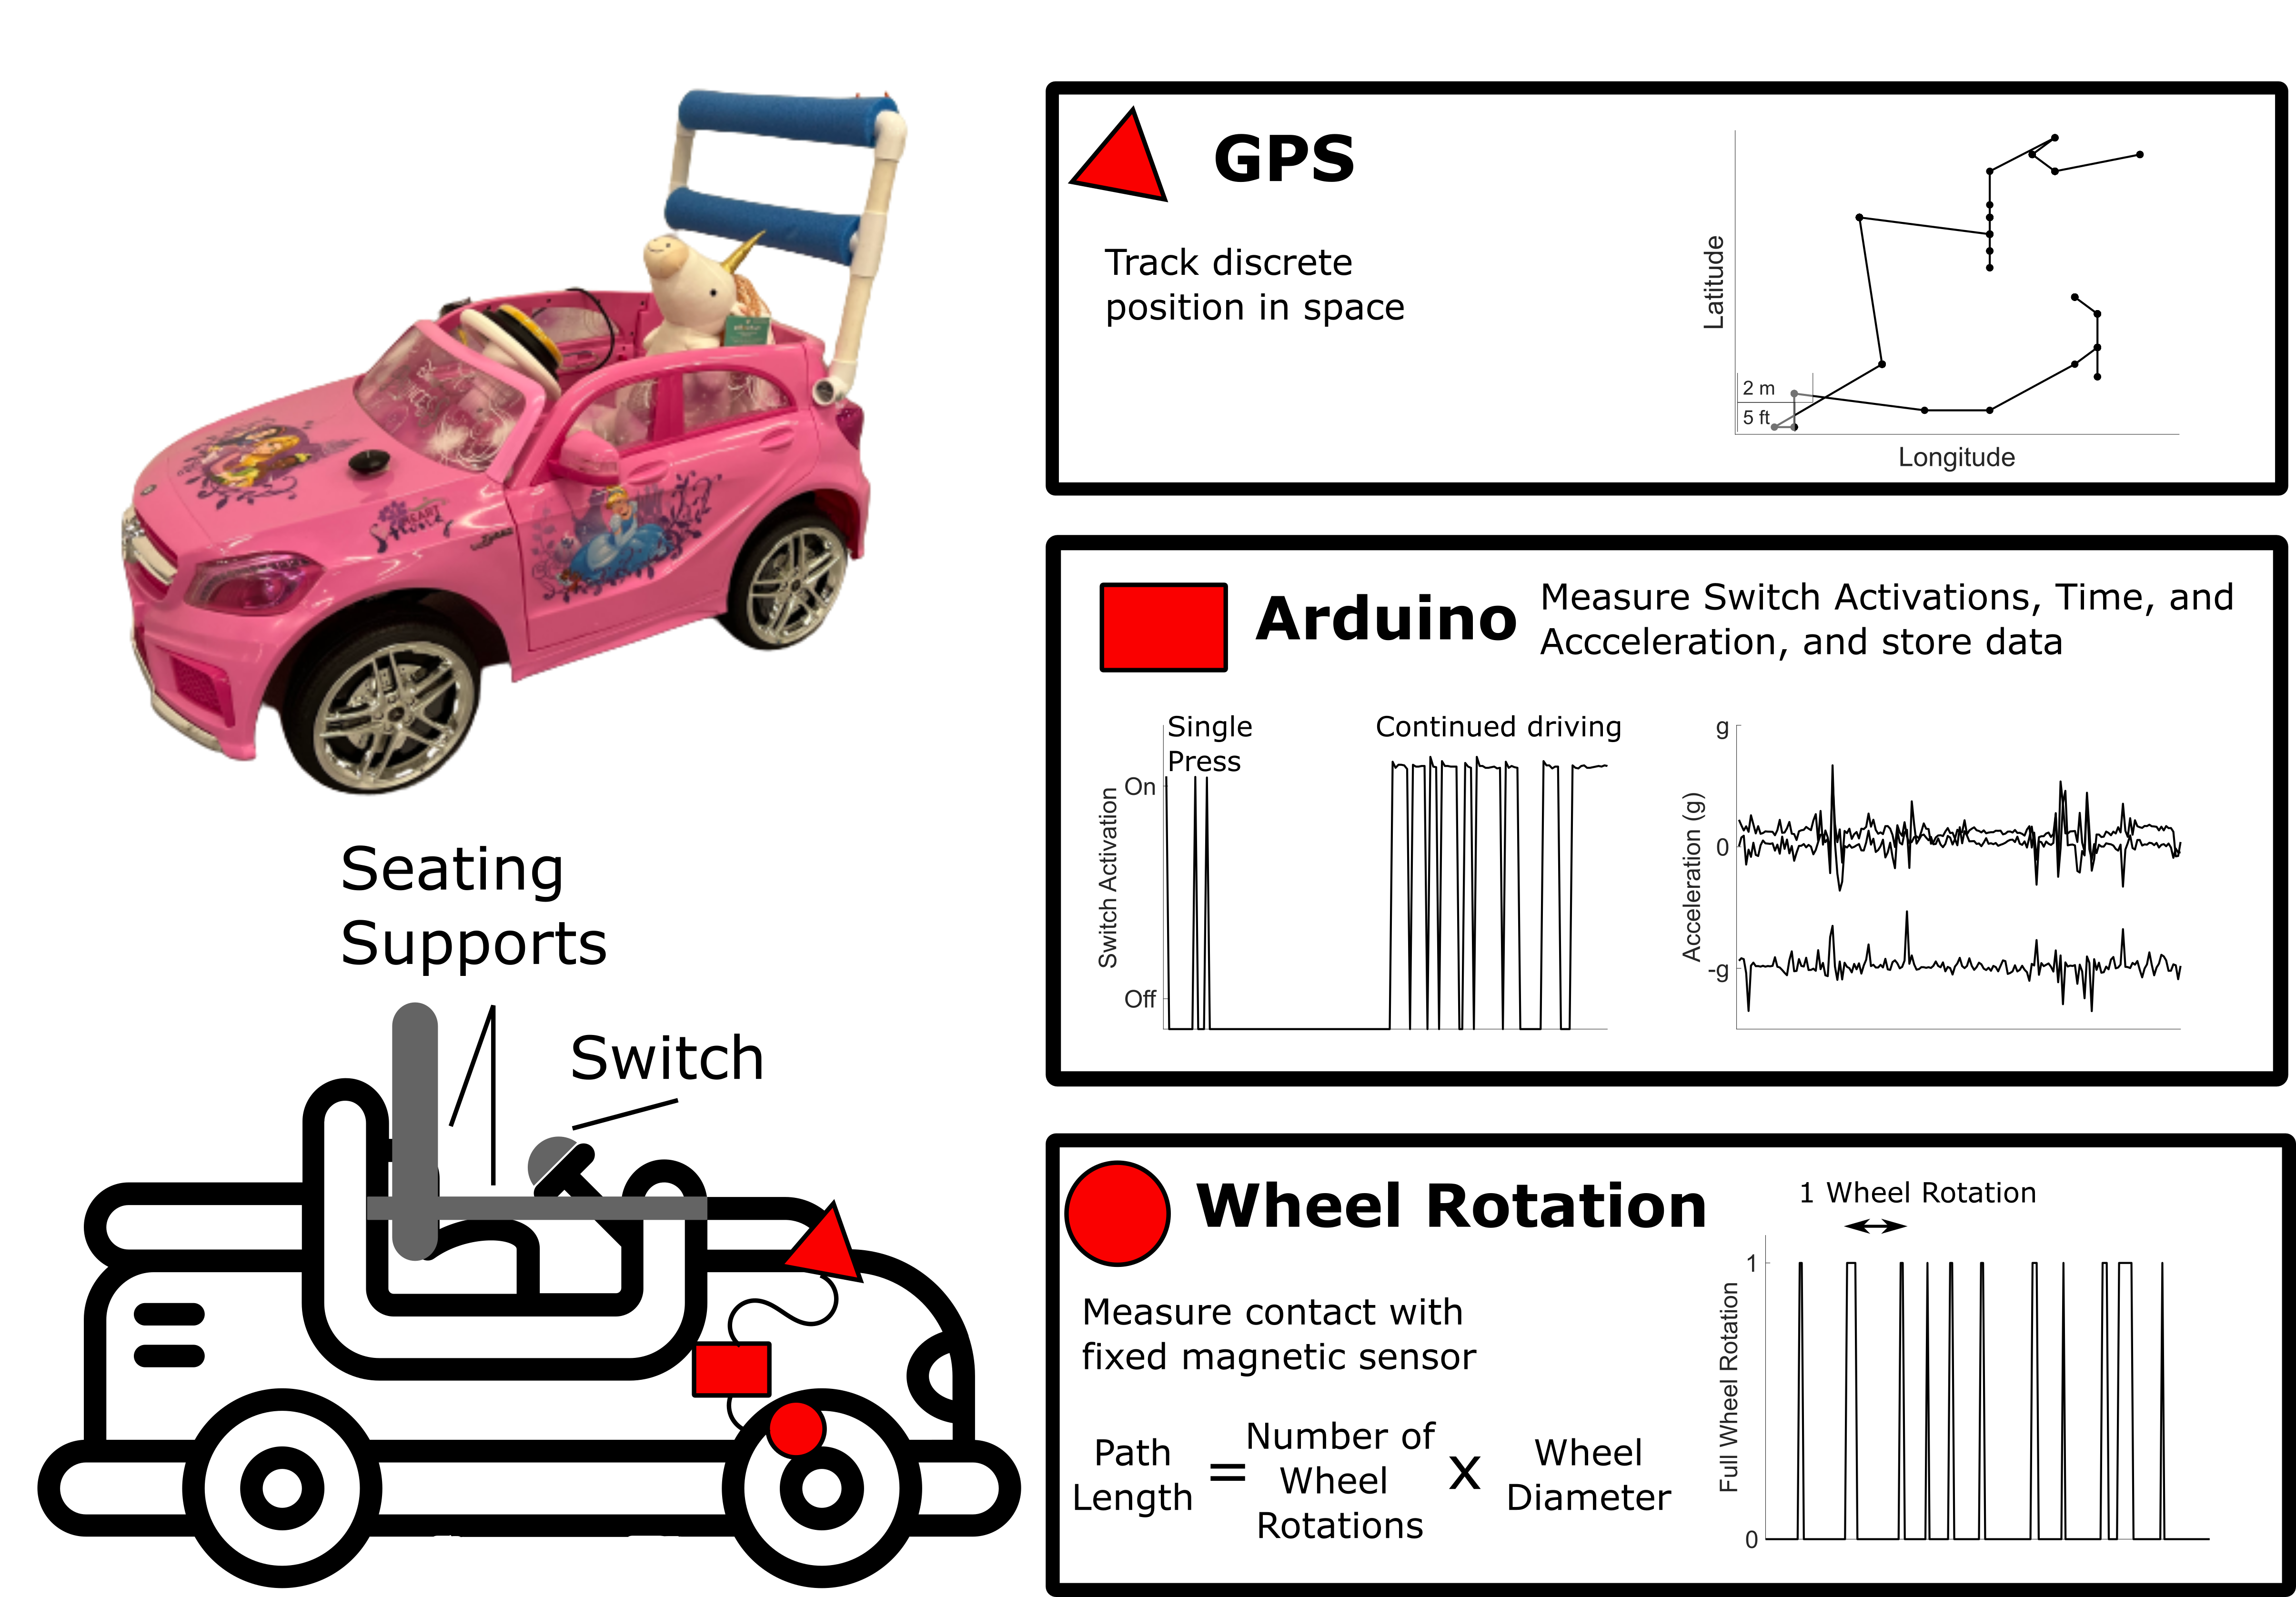 A pink adapted ride-on car is shown in the upper left corner with a switch on the steering wheel and PVC back supports attached to the rear of the vehicle. A stuffed unicorn sits in the driver's seat. In the bottom left corner, a graphic of an adapted ride-on car shows seating supports in the form of an armrest and backrest and a switch mounted on the steering wheel. The datalogger is shown in red with a triangle on the hood of the car, the main datalogger is a red rectangle behind the front wheel, and the wheel rotation sensor is mounted on the front wheel as a red circle. The GPS is used to track discrete position in space and an example of a path map in latitude and longitude is shown. The Arduino is used to measure switch activations, time, and acceleration and store data. An example of on and off switch activations is shown for a single button press and continued button press. An example of tri-axis accelerometer data is also shown. Wheel rotation measures contact with a fixed magnetic sensor on the wheel. The wheel rotation is shown as a binary data source with a high showing each wheel rotation. The path length was calculated by measuring the number of wheel rotations by the wheel diameter.